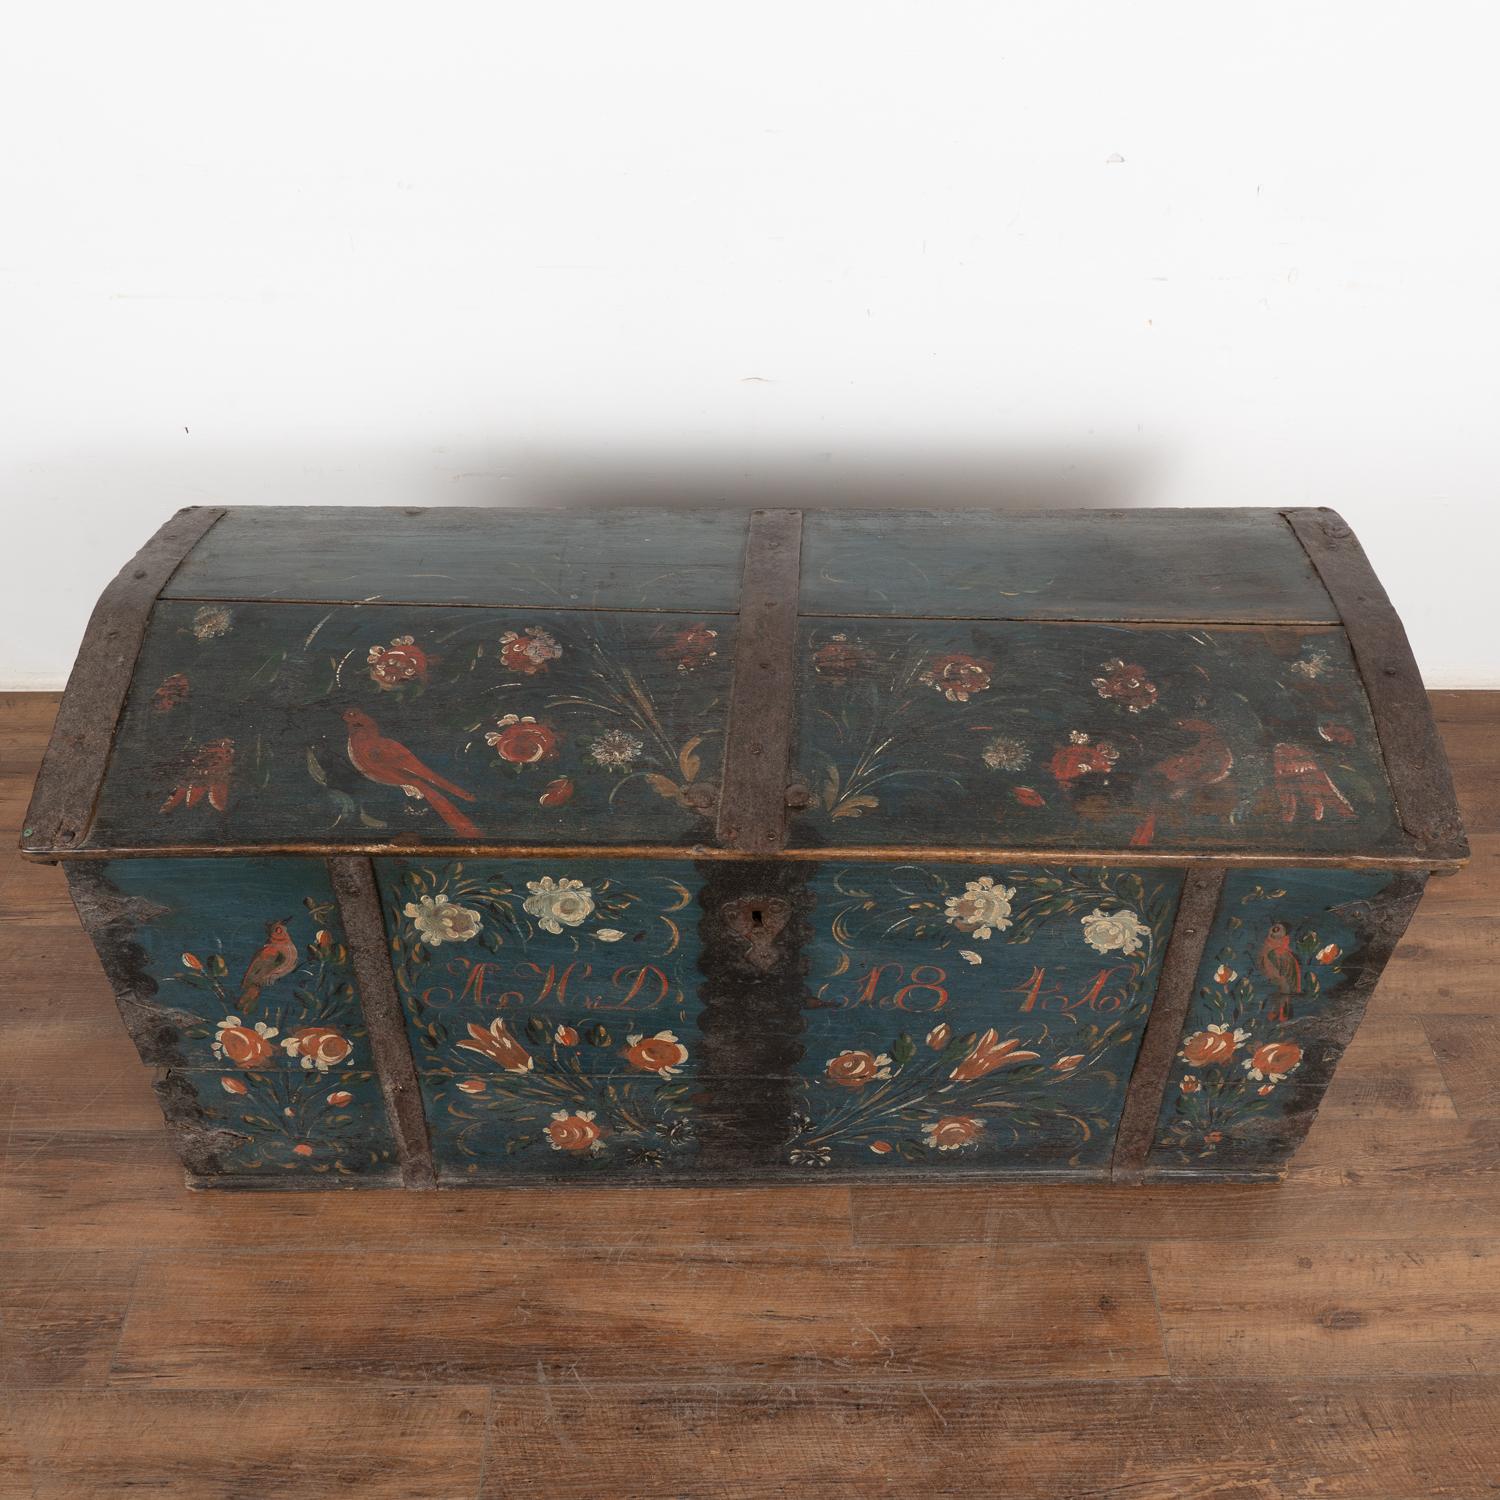 Original Painted Blue Dome Top Trunk with Birds and Flowers, Sweden dated 1841 For Sale 2